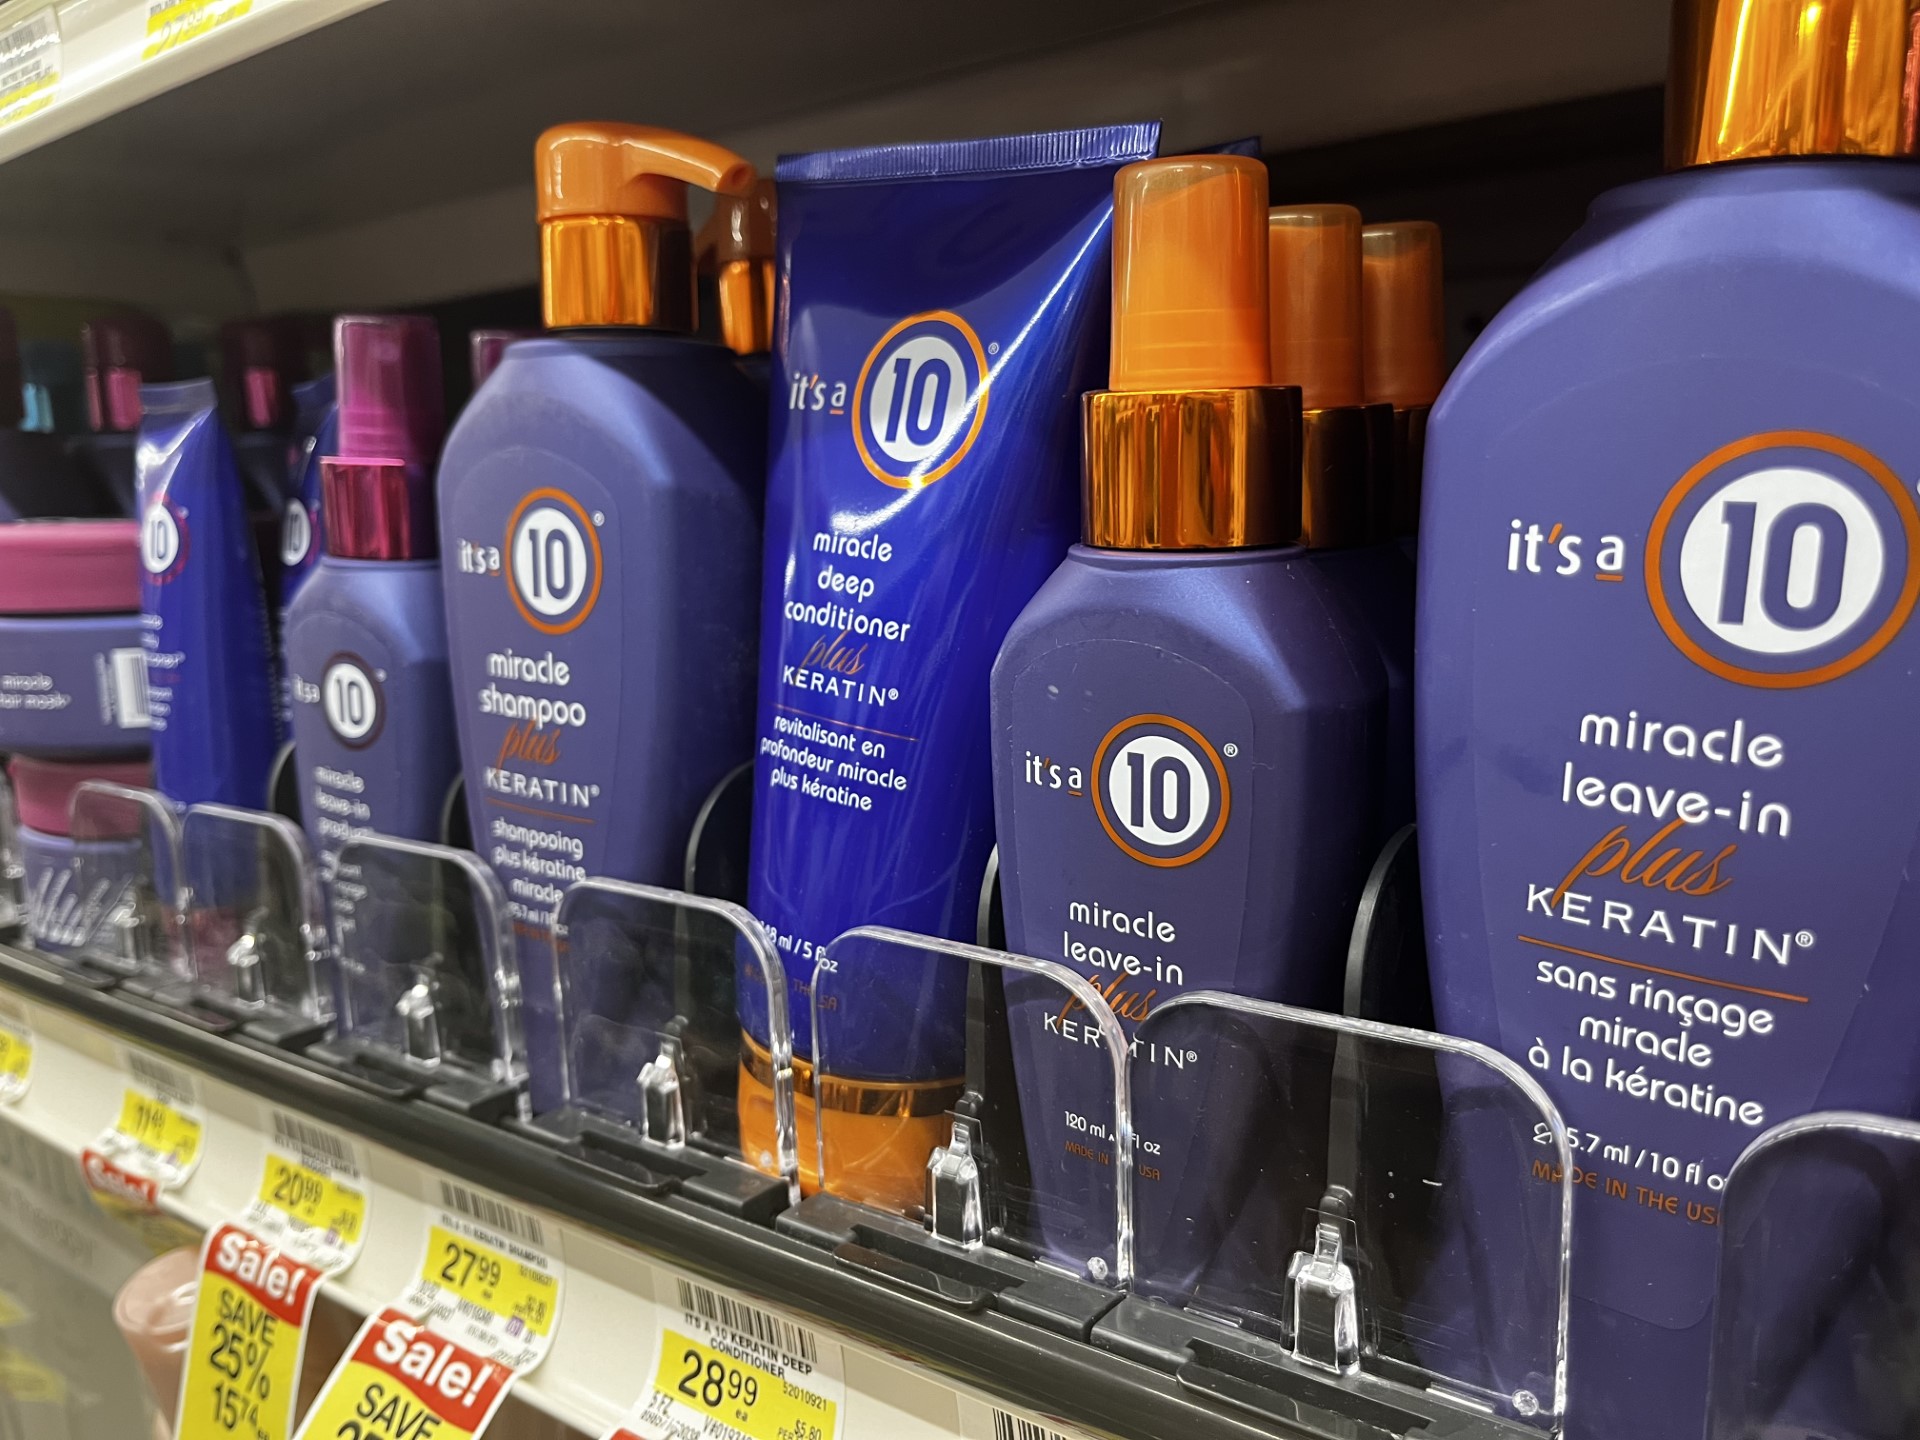 So many products to choose from, which one will be best for your hair?